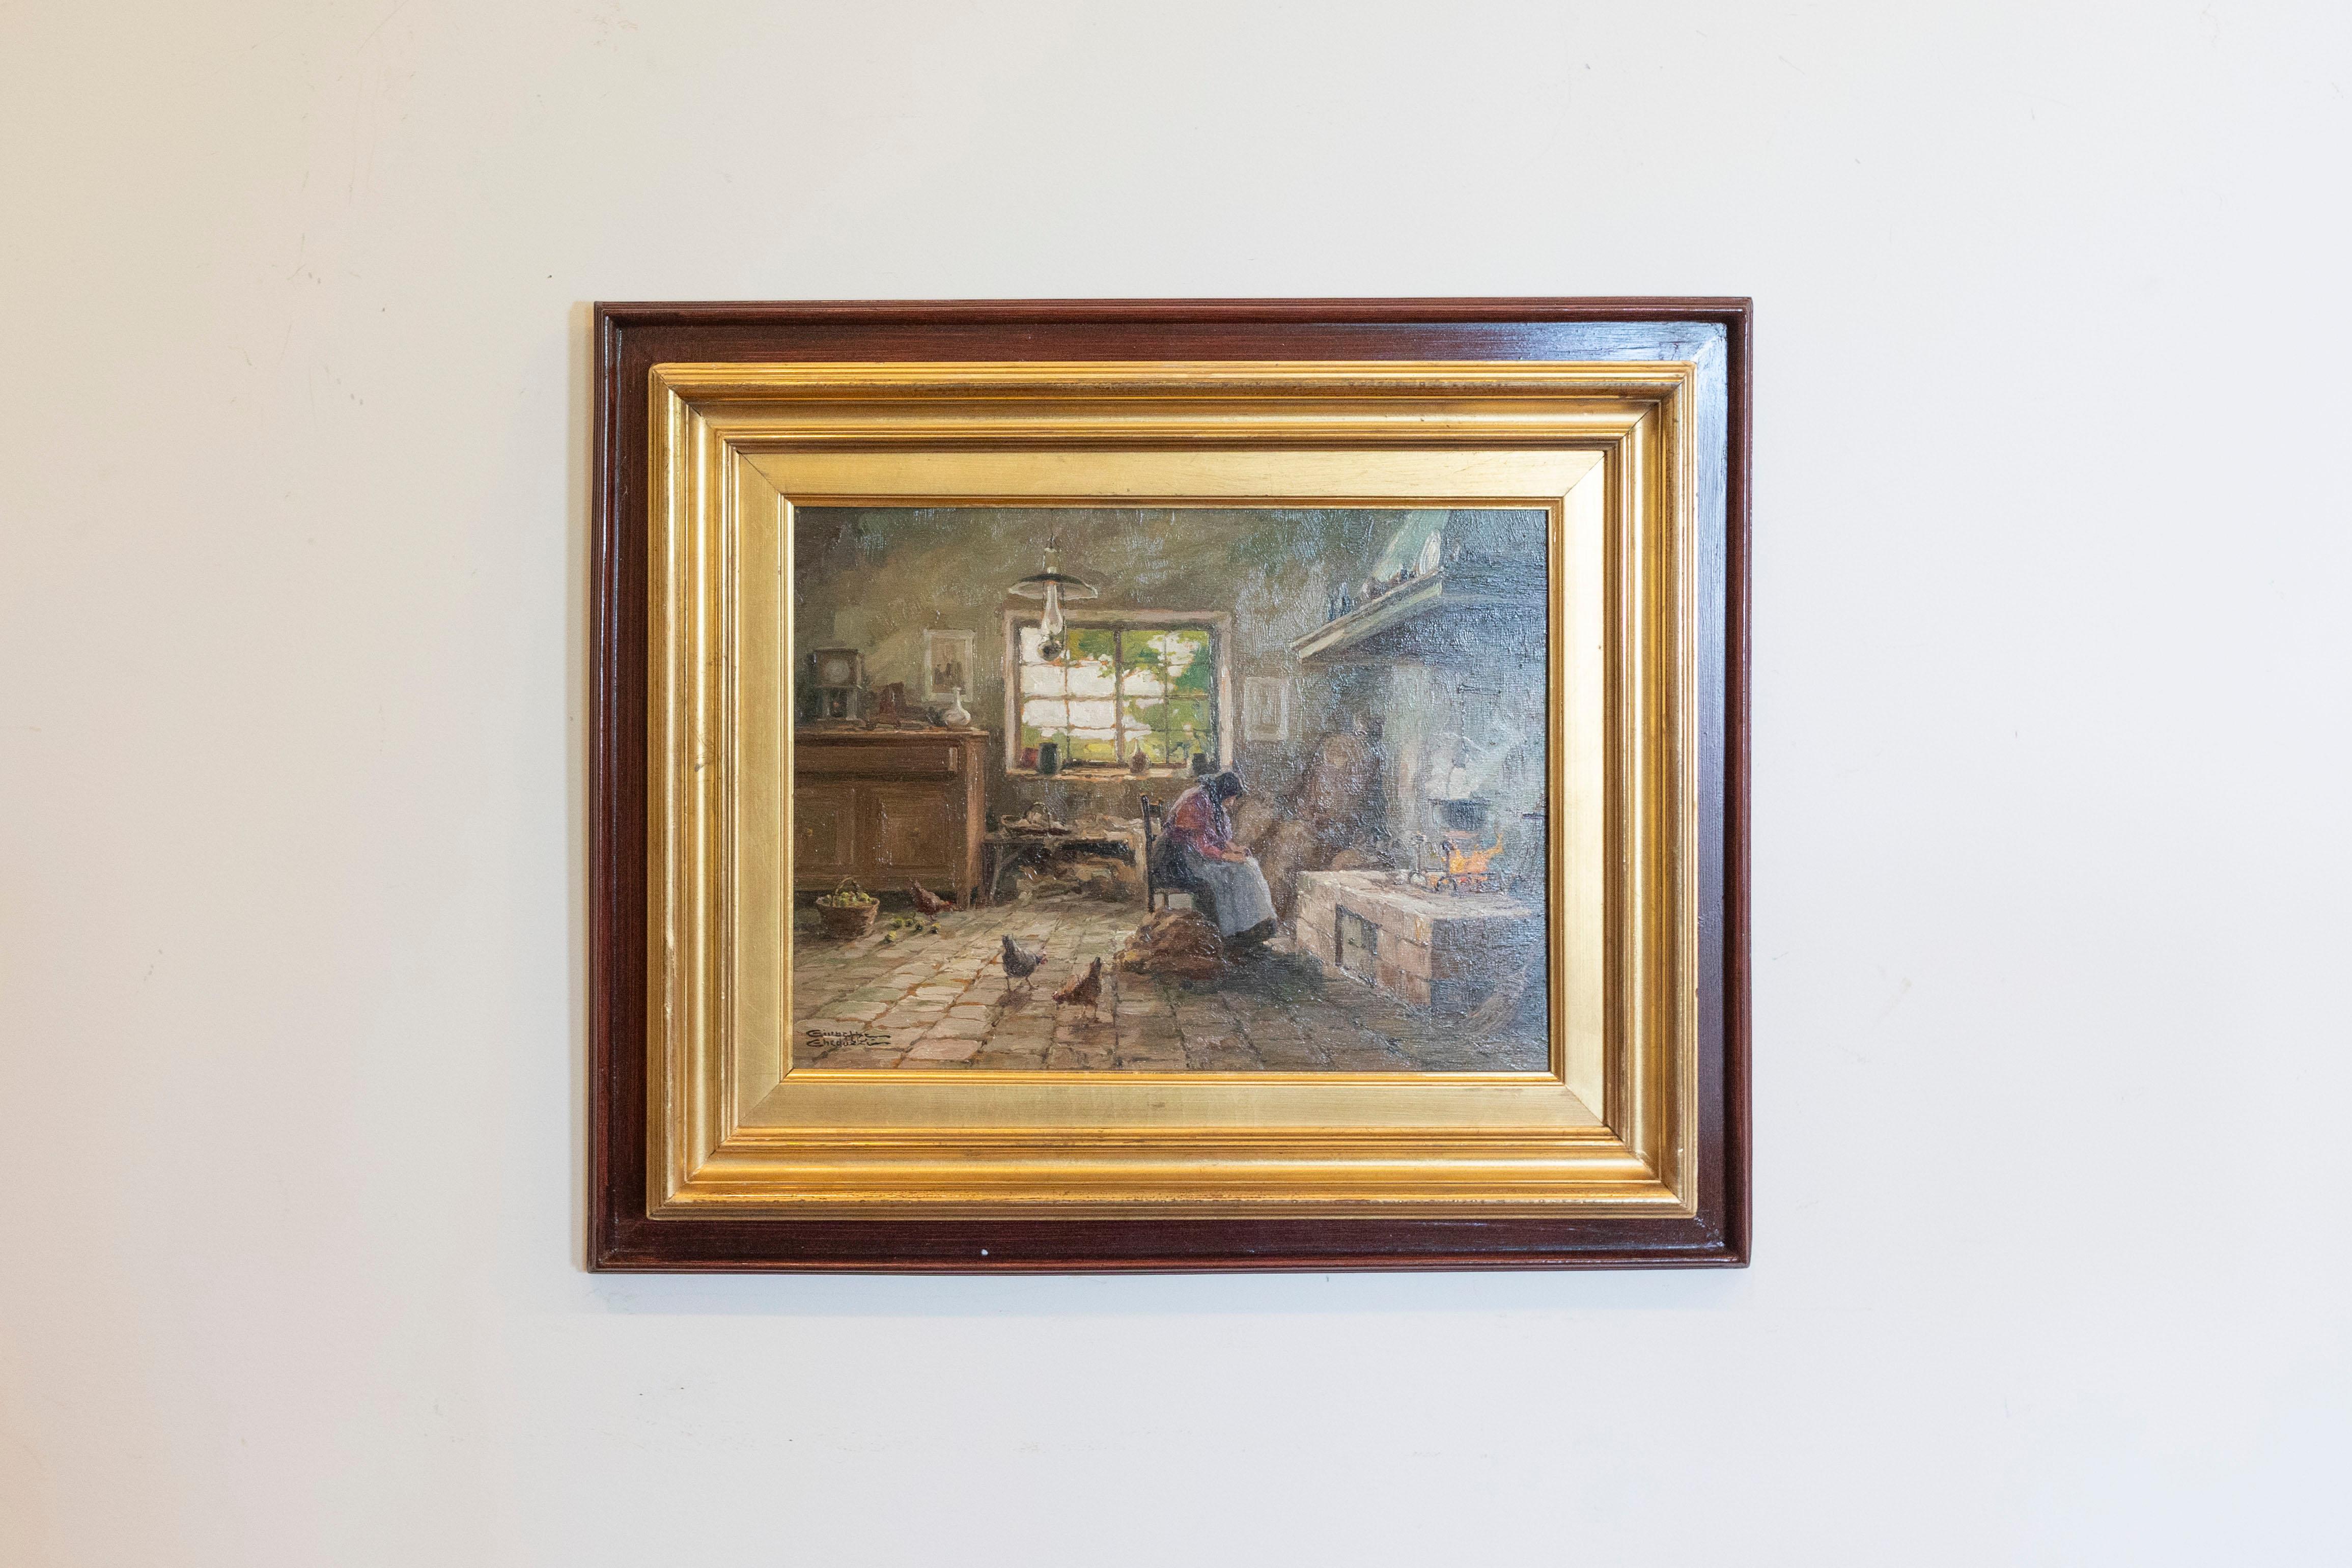 An Italian oil on panel painting from circa 1930, signed by Giuseppe Gheduzzi and depicting an interior with woman at the fireplace. This captivating Italian oil on panel painting from circa 1930, signed by Giuseppe Gheduzzi (1889-1957), portrays a